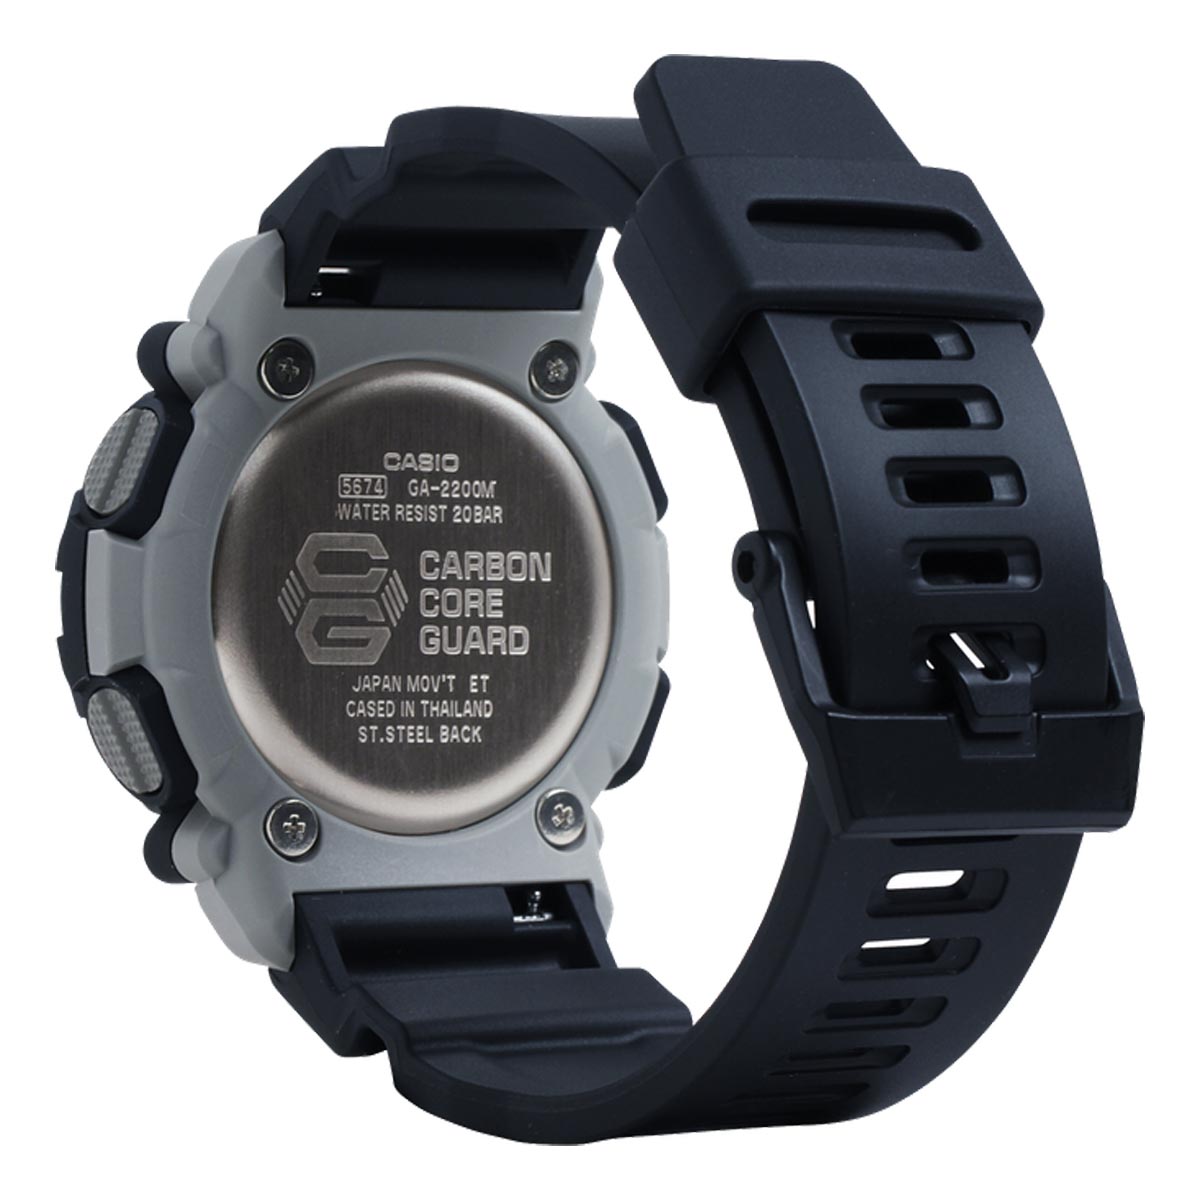 G Shock Mens Watch with Black Dial and Black Resin Strap (quartz movement)